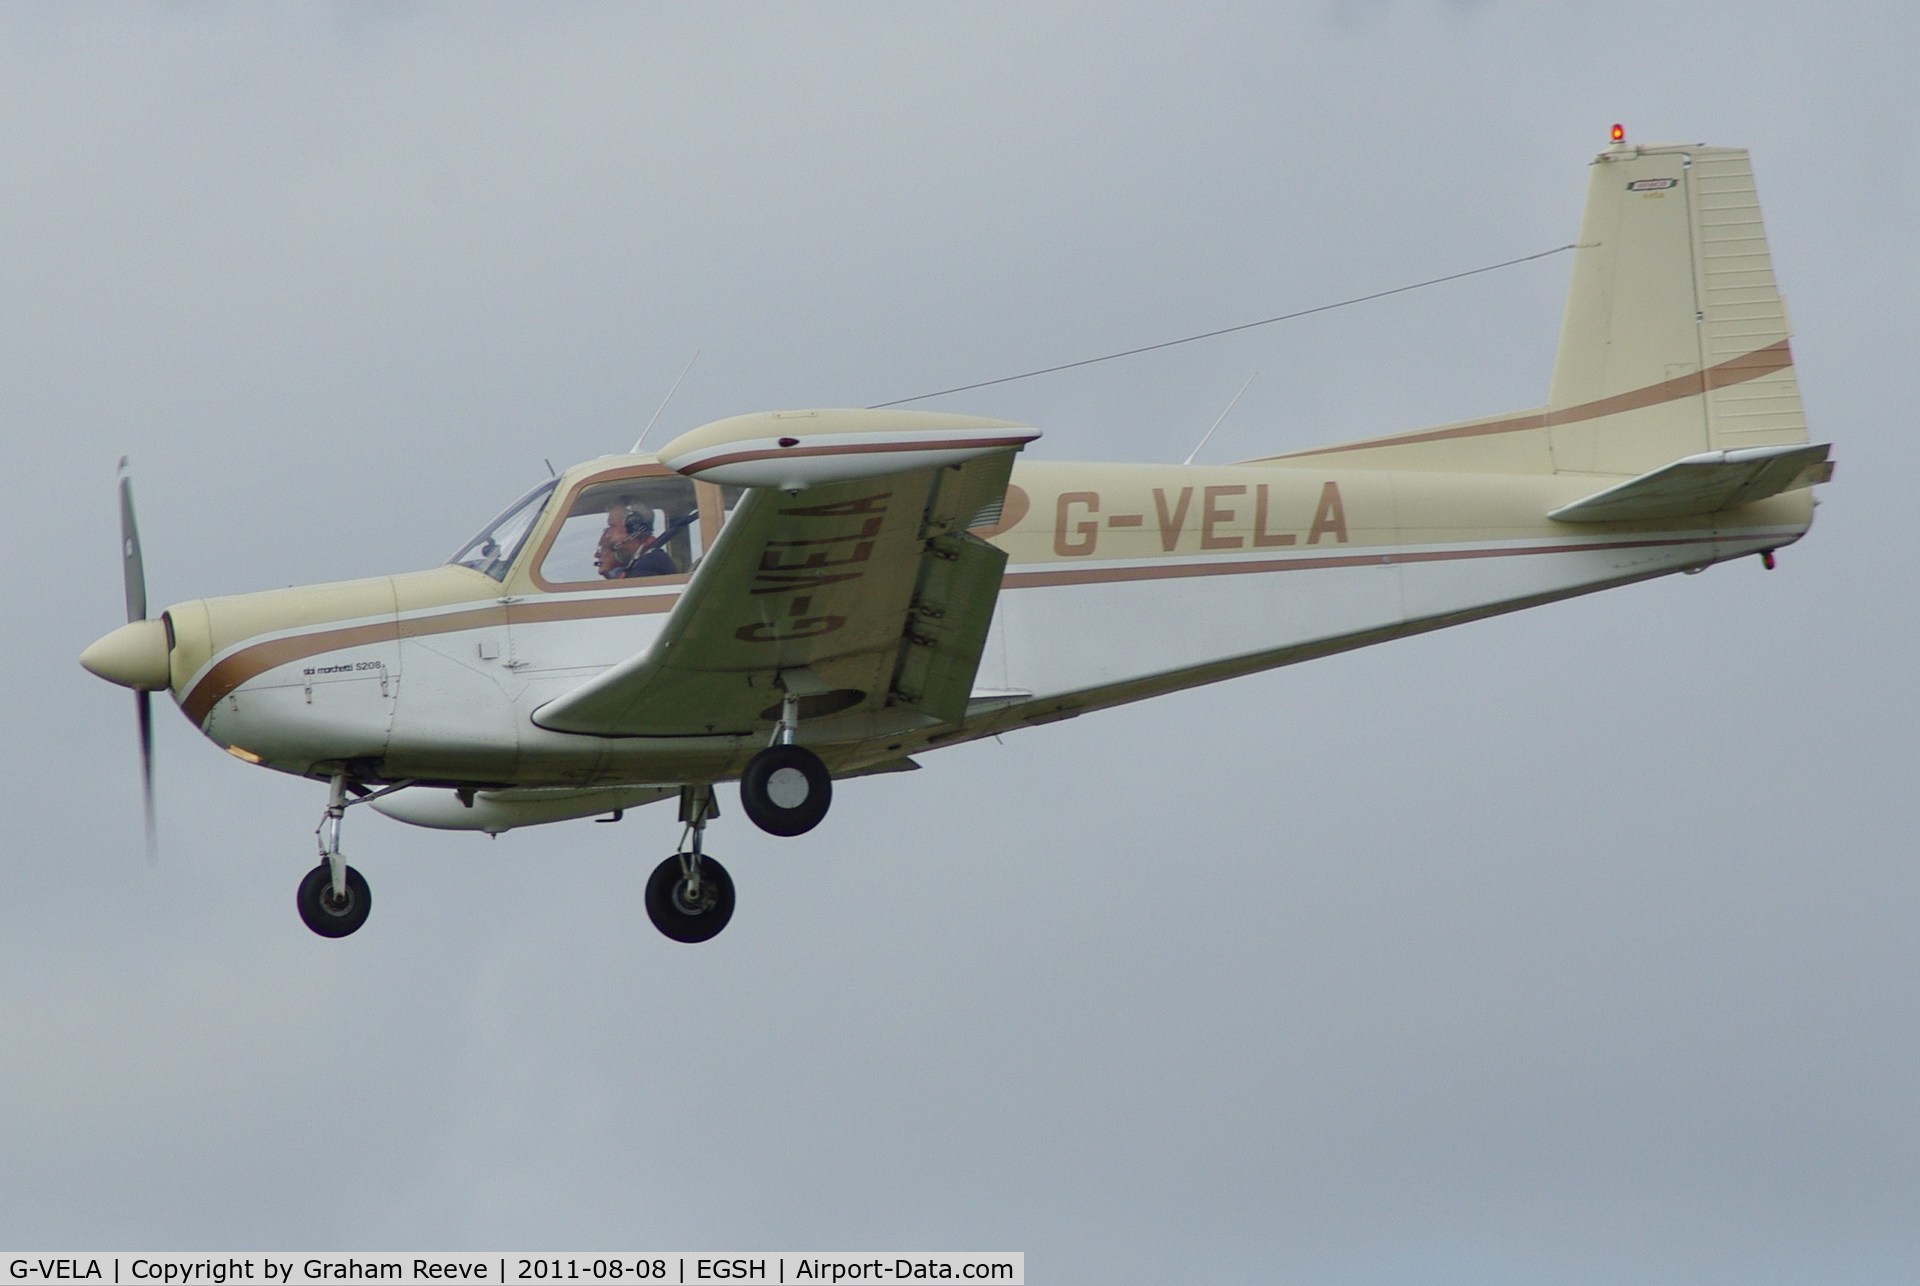 G-VELA, 1968 SIAI-Marchetti S-205-22R C/N 4-149, About to touch down.